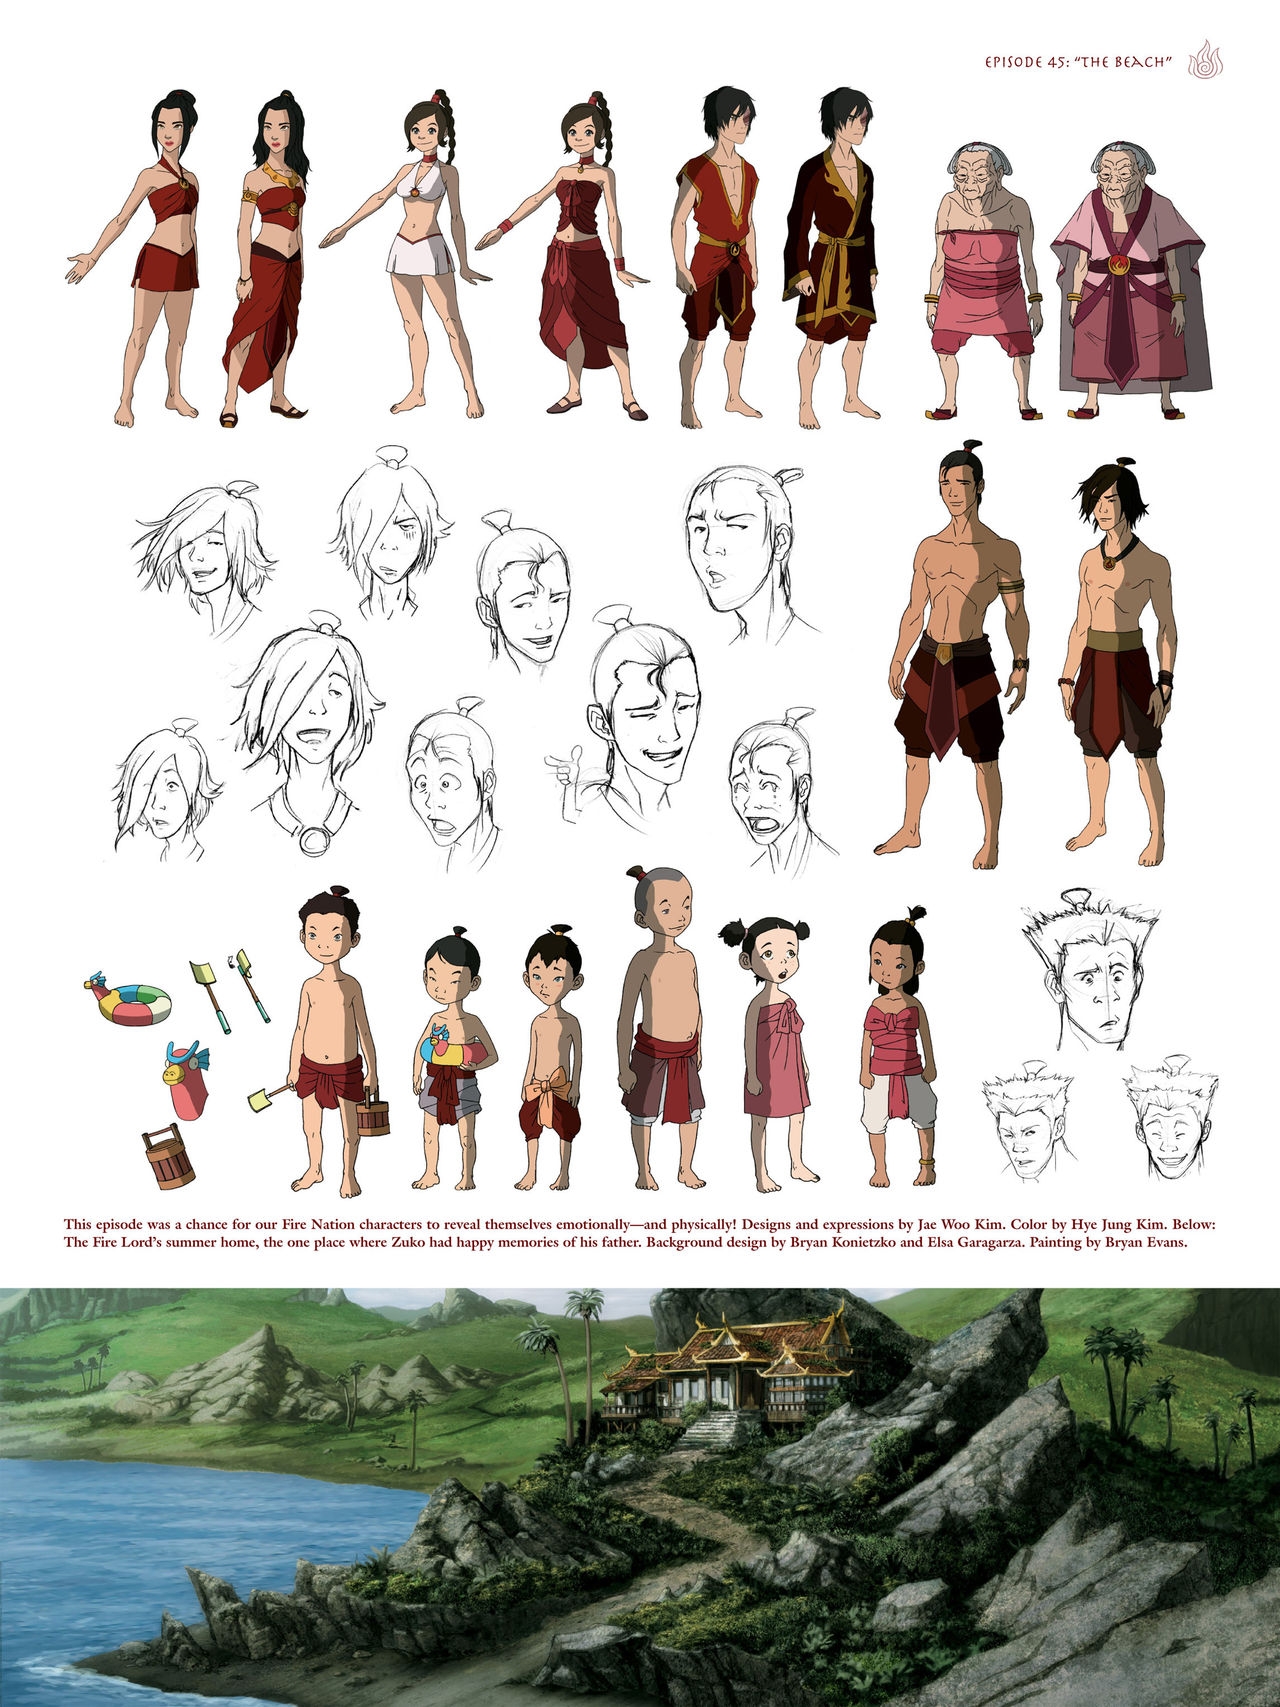 Avatar - The Last Airbender - The Art of the Animated Series 139